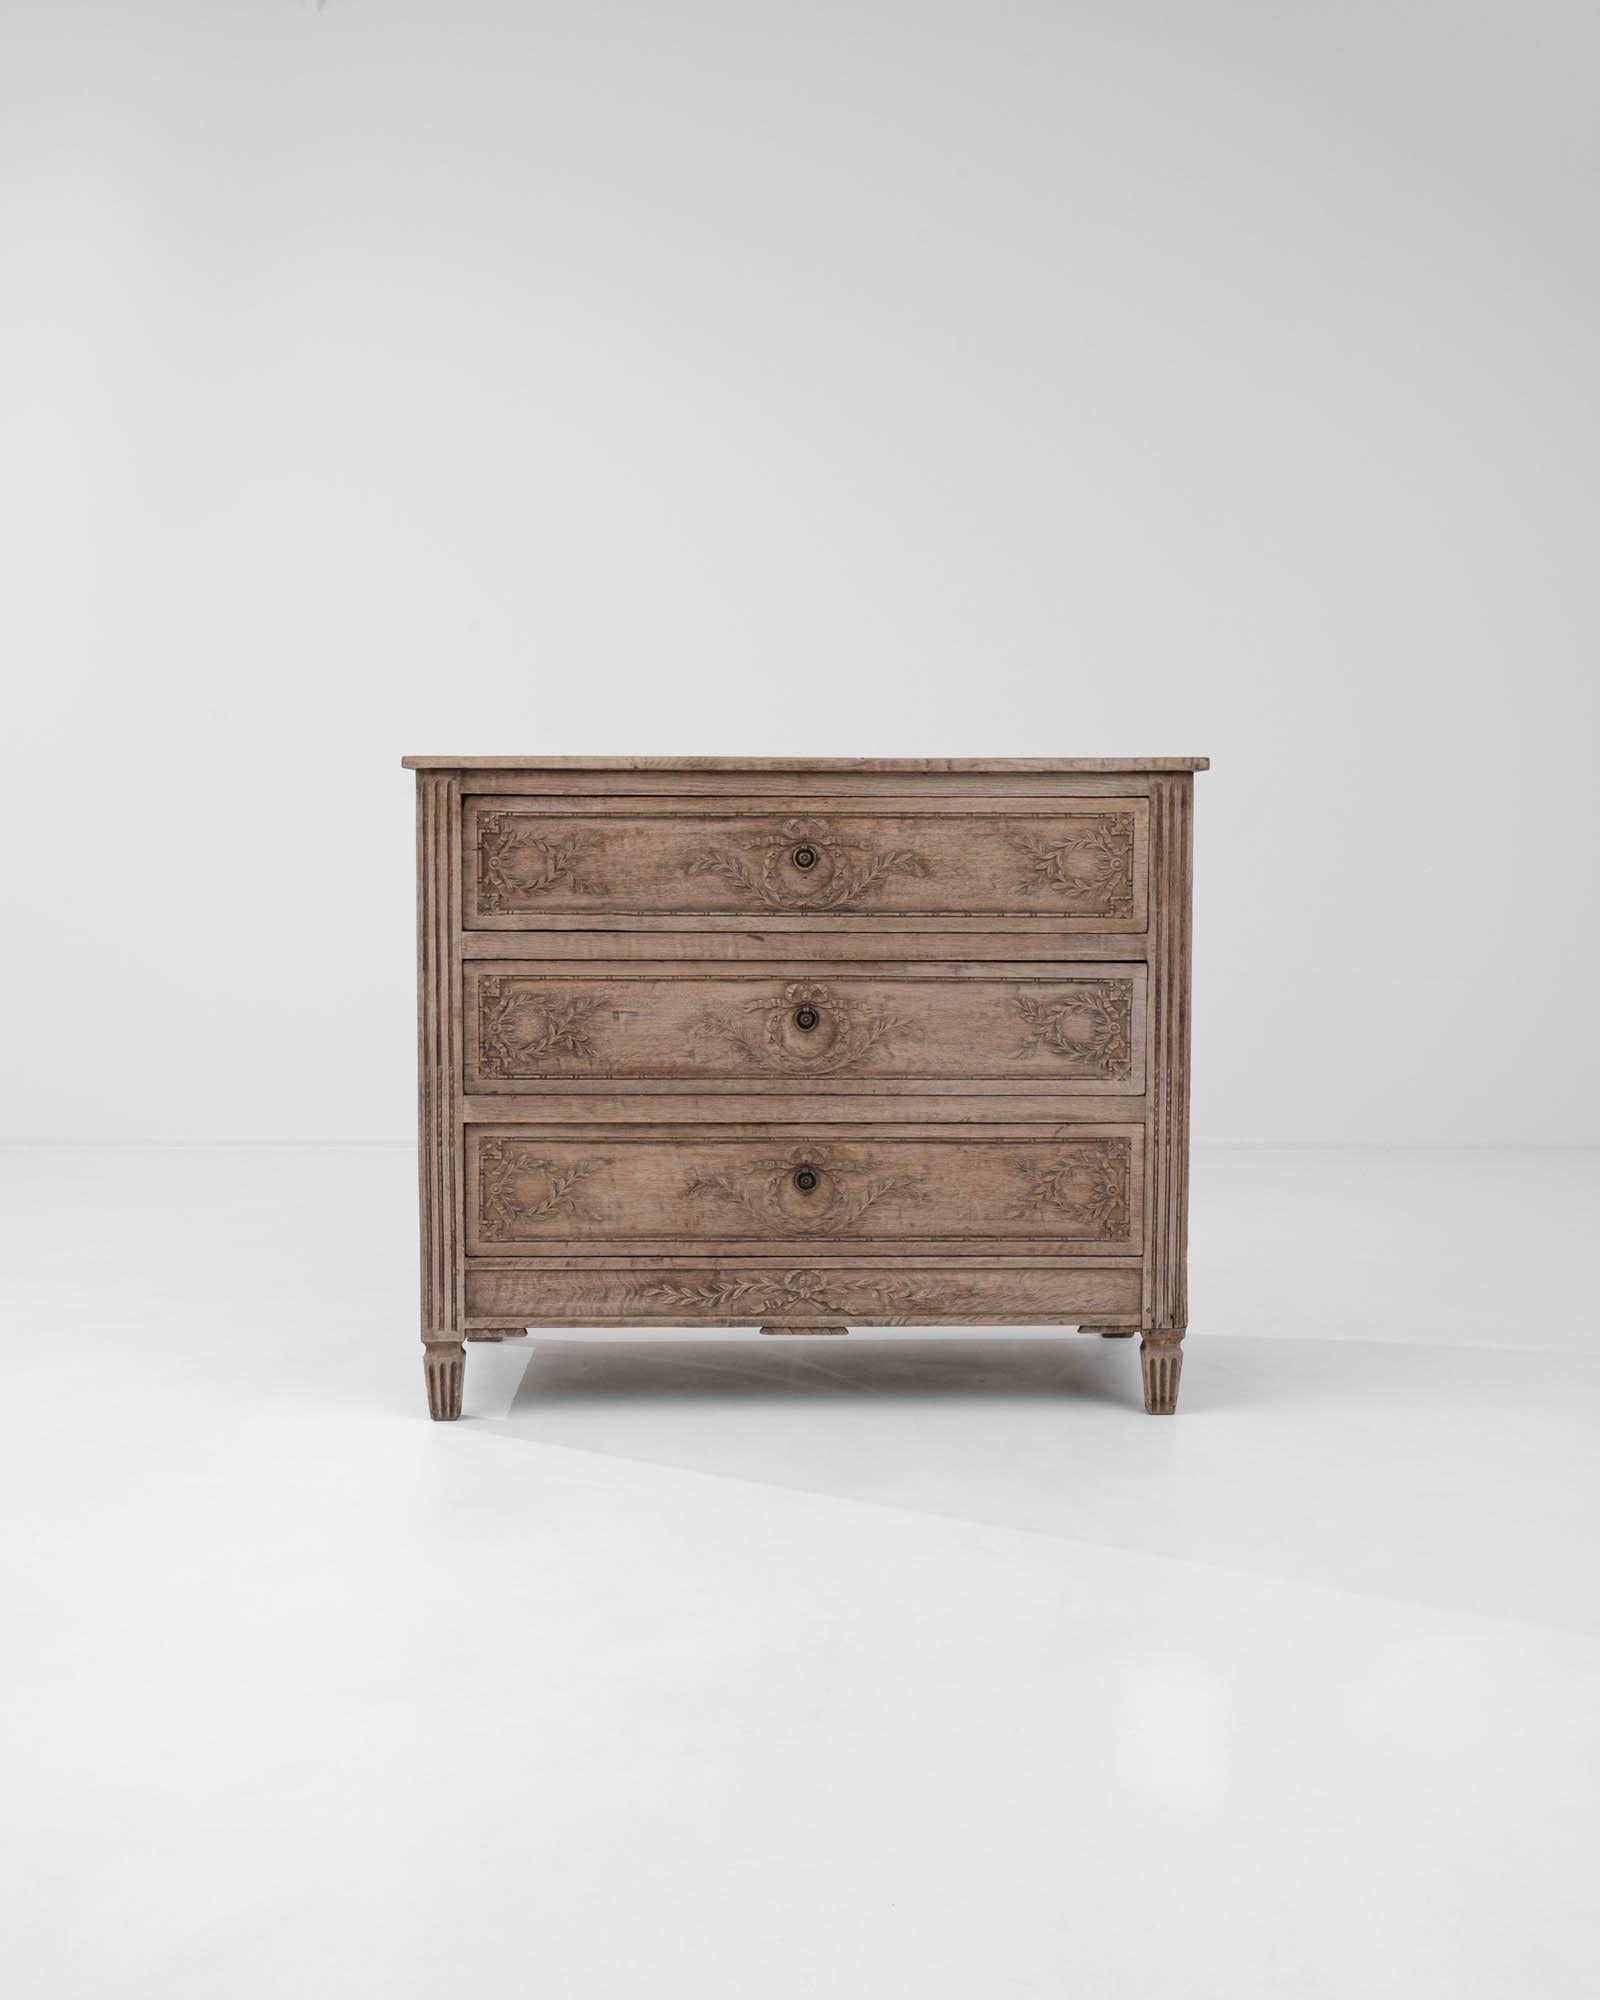 Artfully carved flower wreath carvings with ribbons, which adorn the front of this three-drawer chest crafted in 19th-century France, are exquisitely highlighted against the high-quality oak wood, flaunting a subtle warm hue. The central carvings